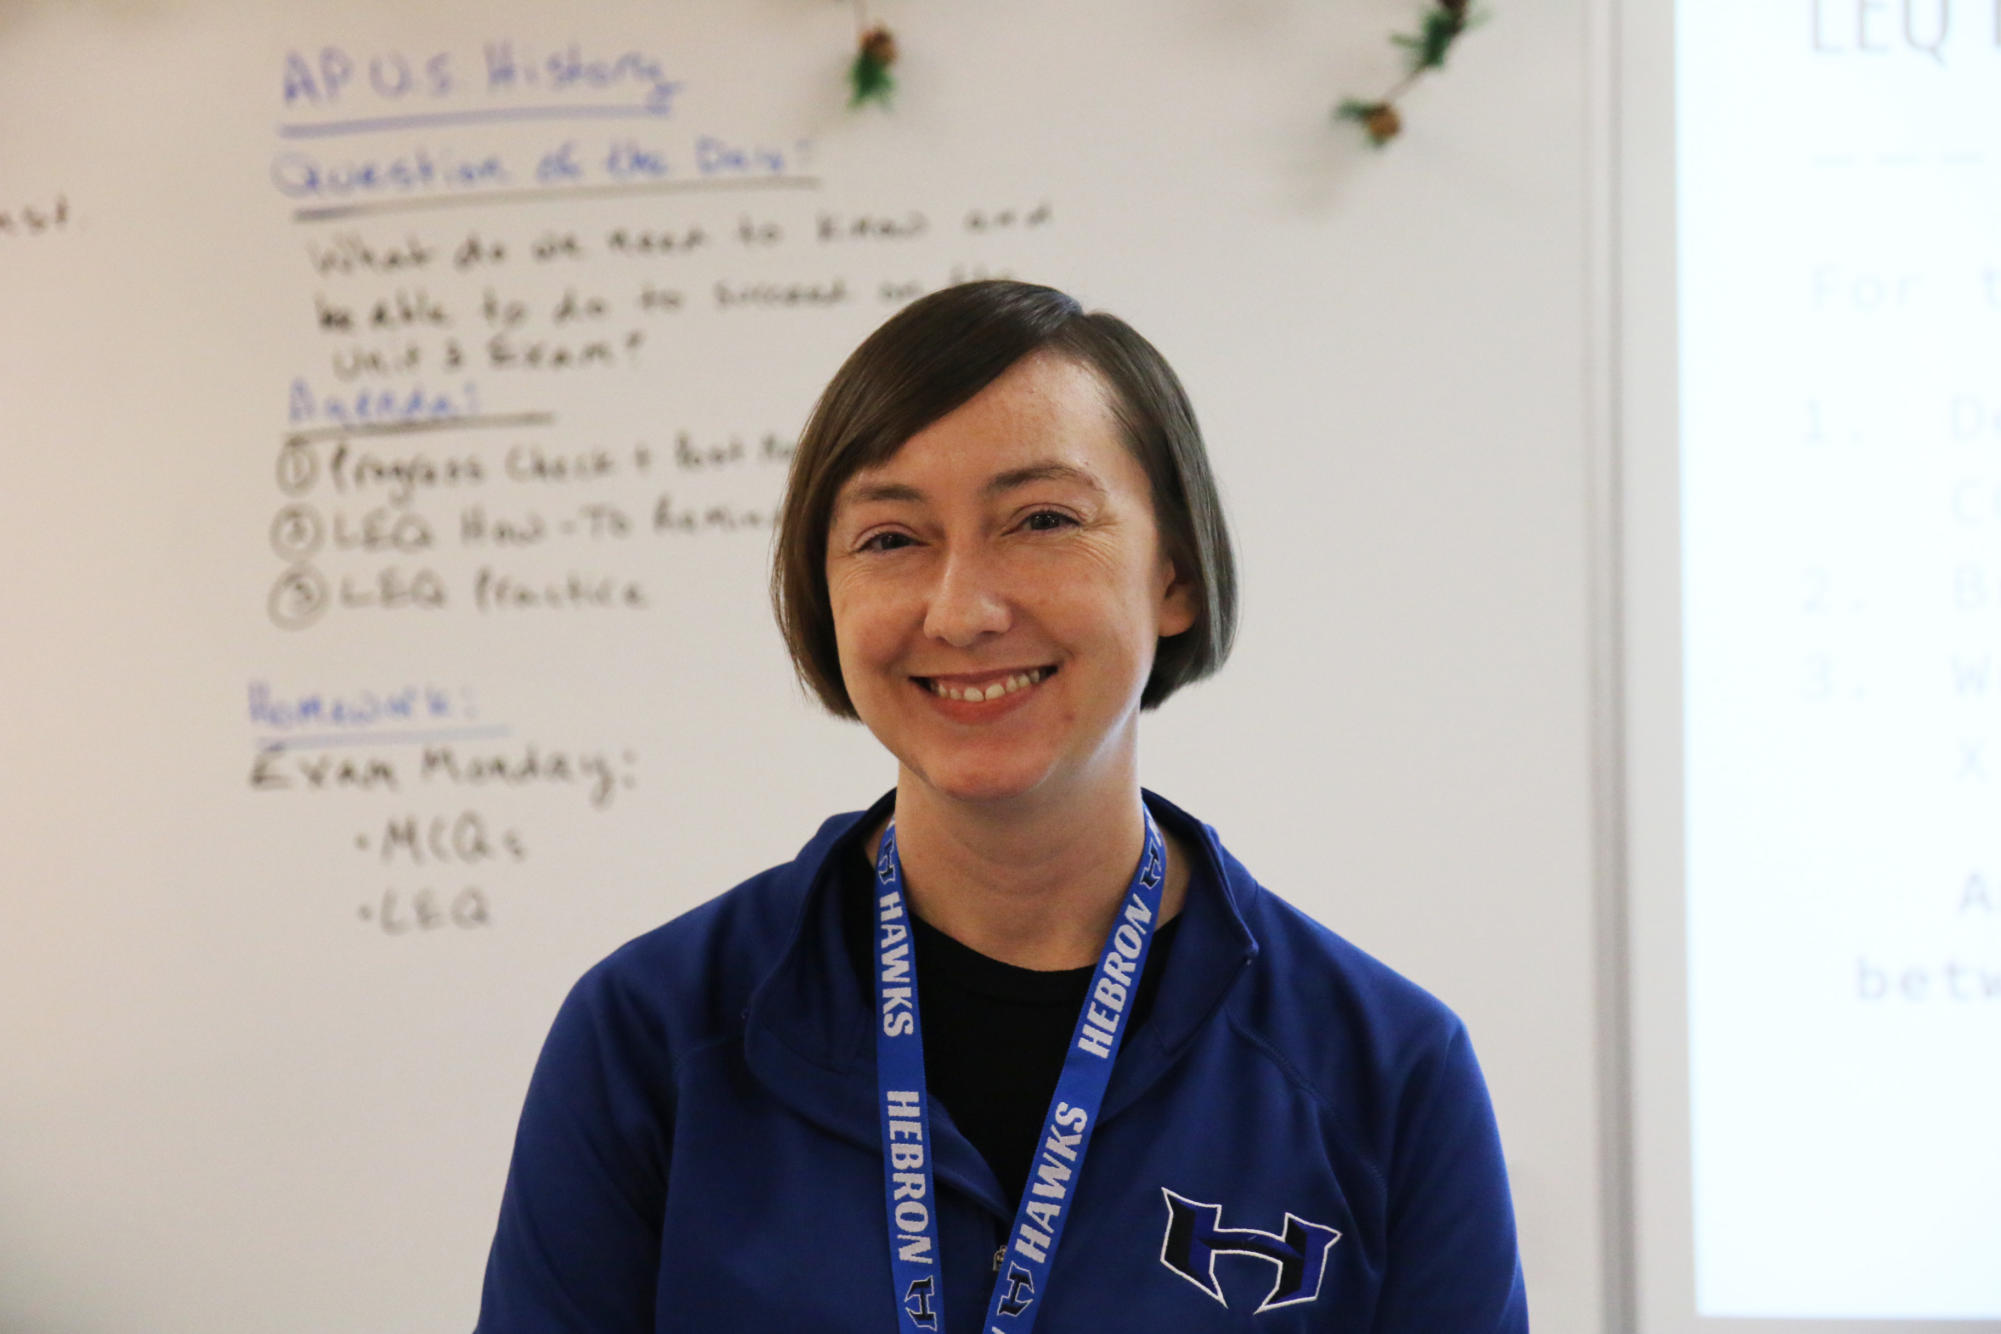 AP government and U.S. history teacher Carrie Roberts